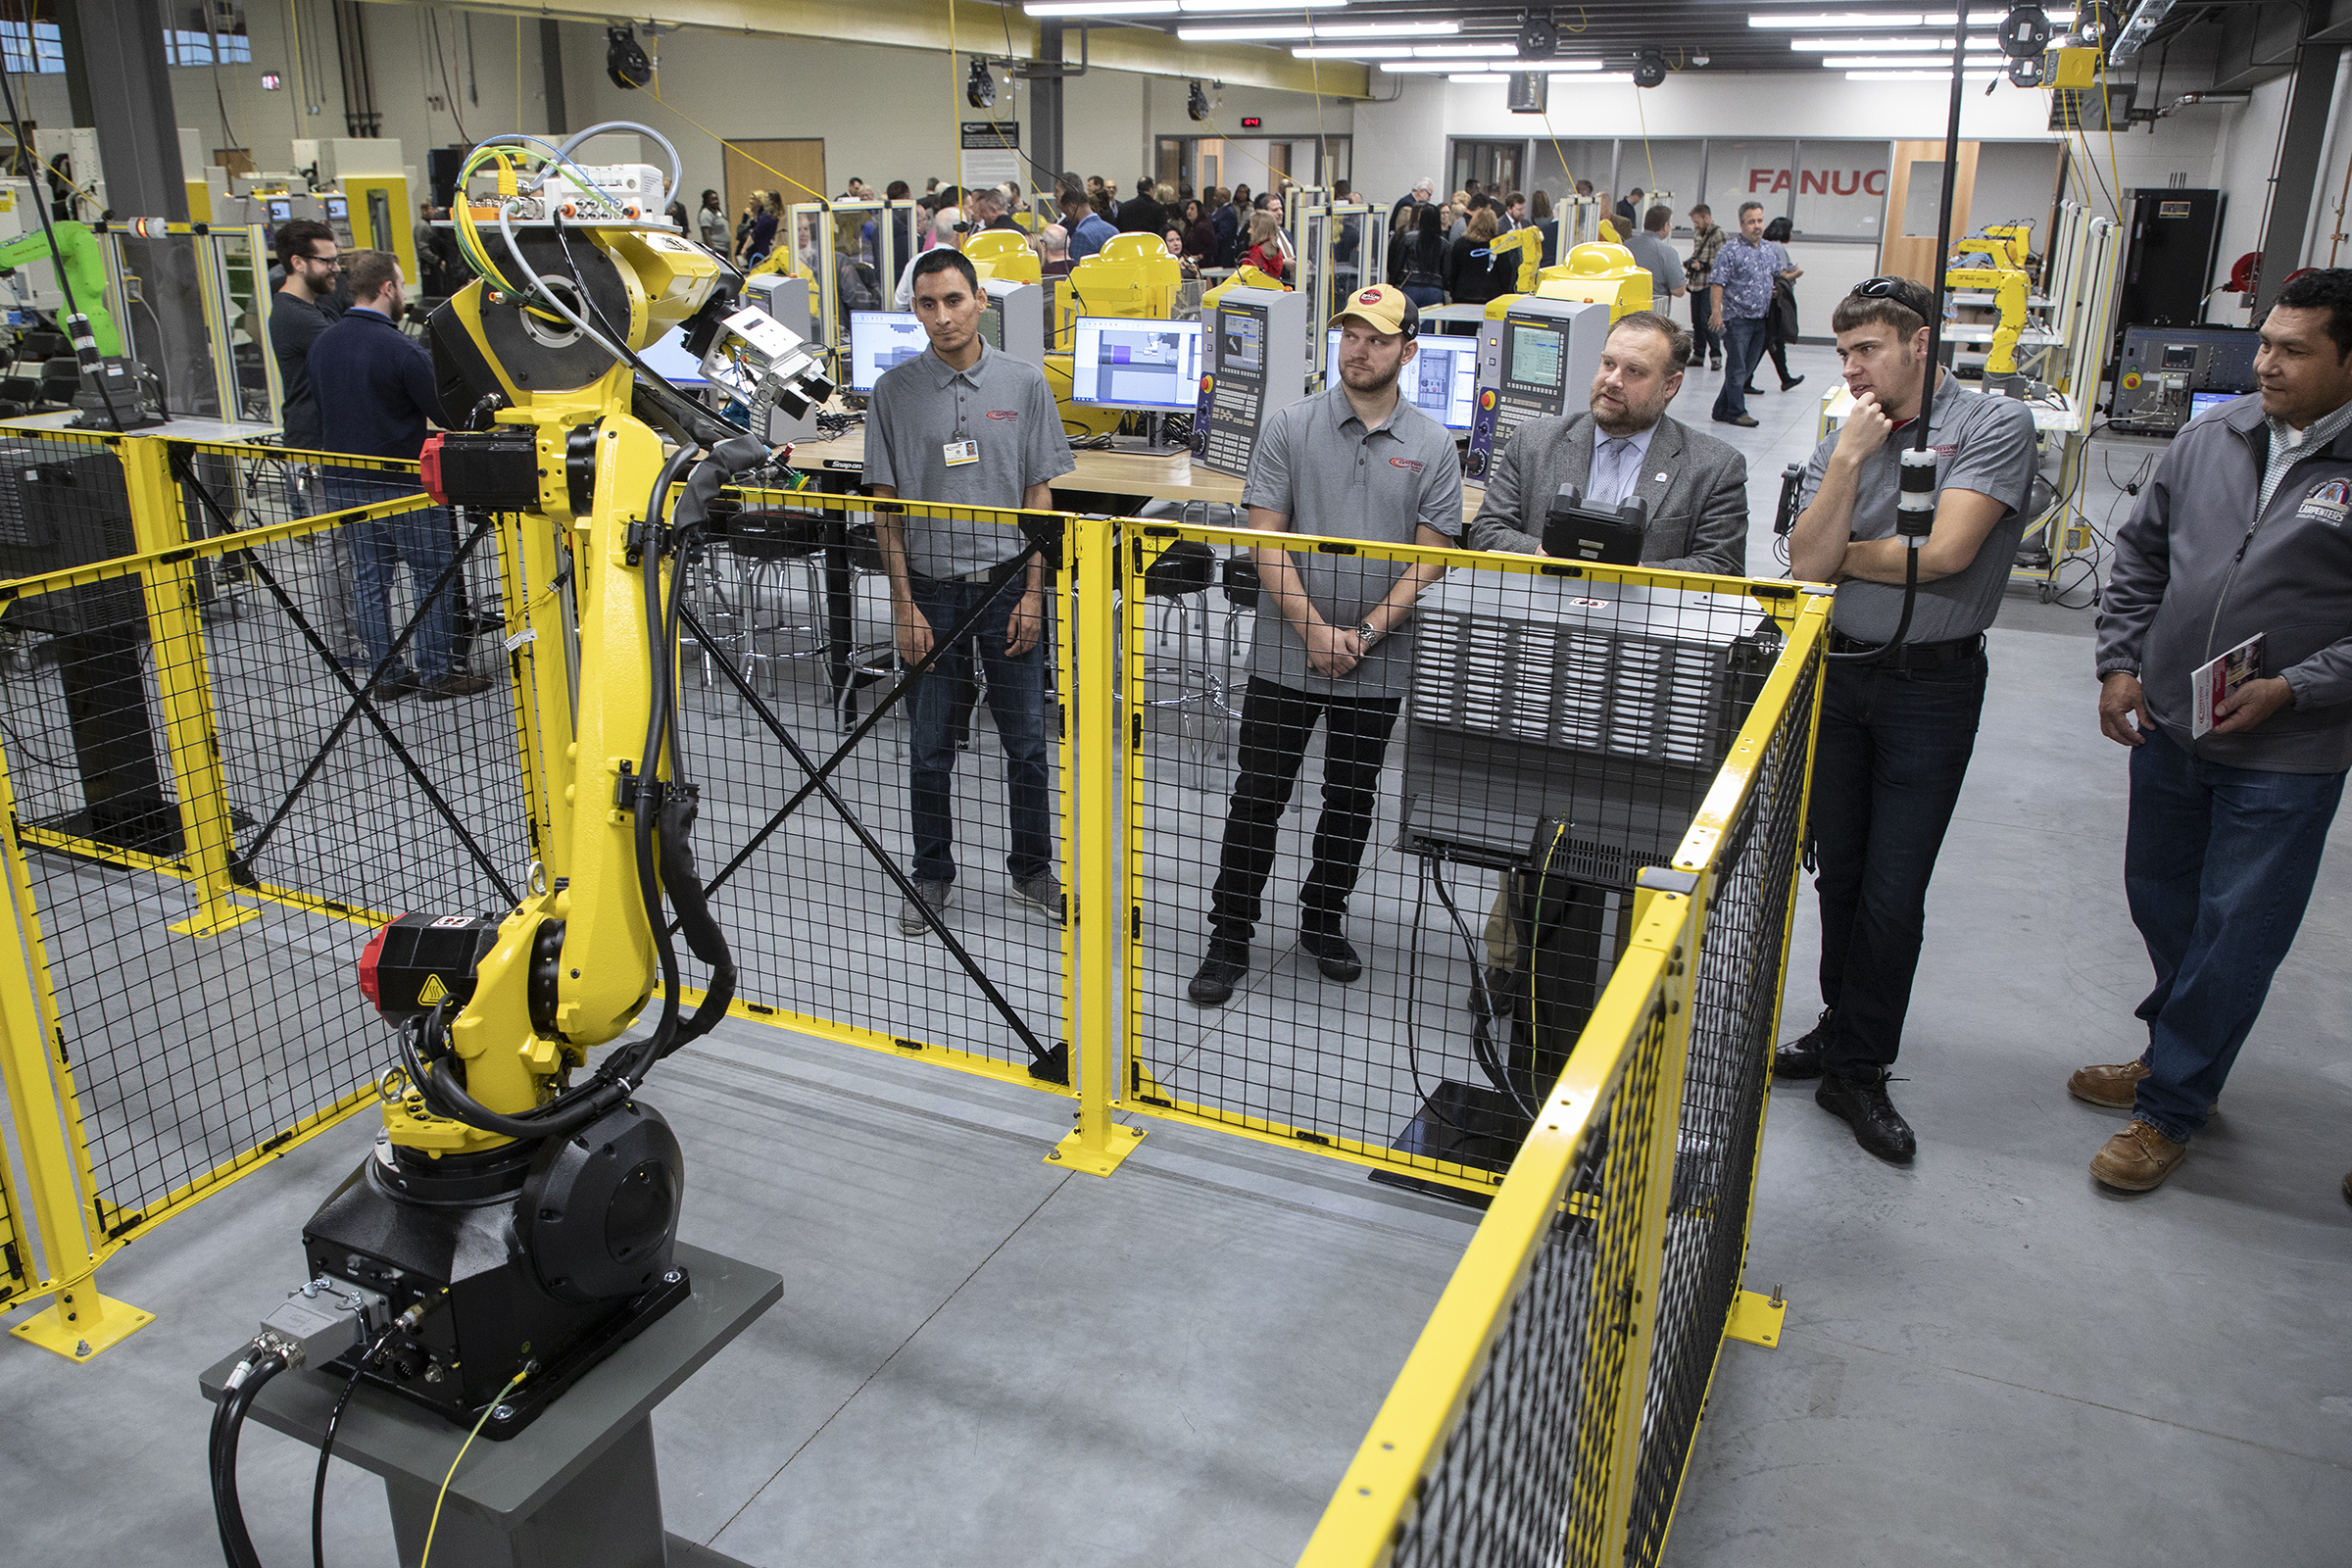 Racine, Wis., Mayor Cory Mason tries out one of the industrial robots at the opening ceremony for the remodeled and expanded Gateway Technical College SC Johnson iMET Center in Sturtevant Wis., Oct. 22, 2019. Many national companies stepped forward to help make the center a success, such as FANUC America's robot systems in the center.